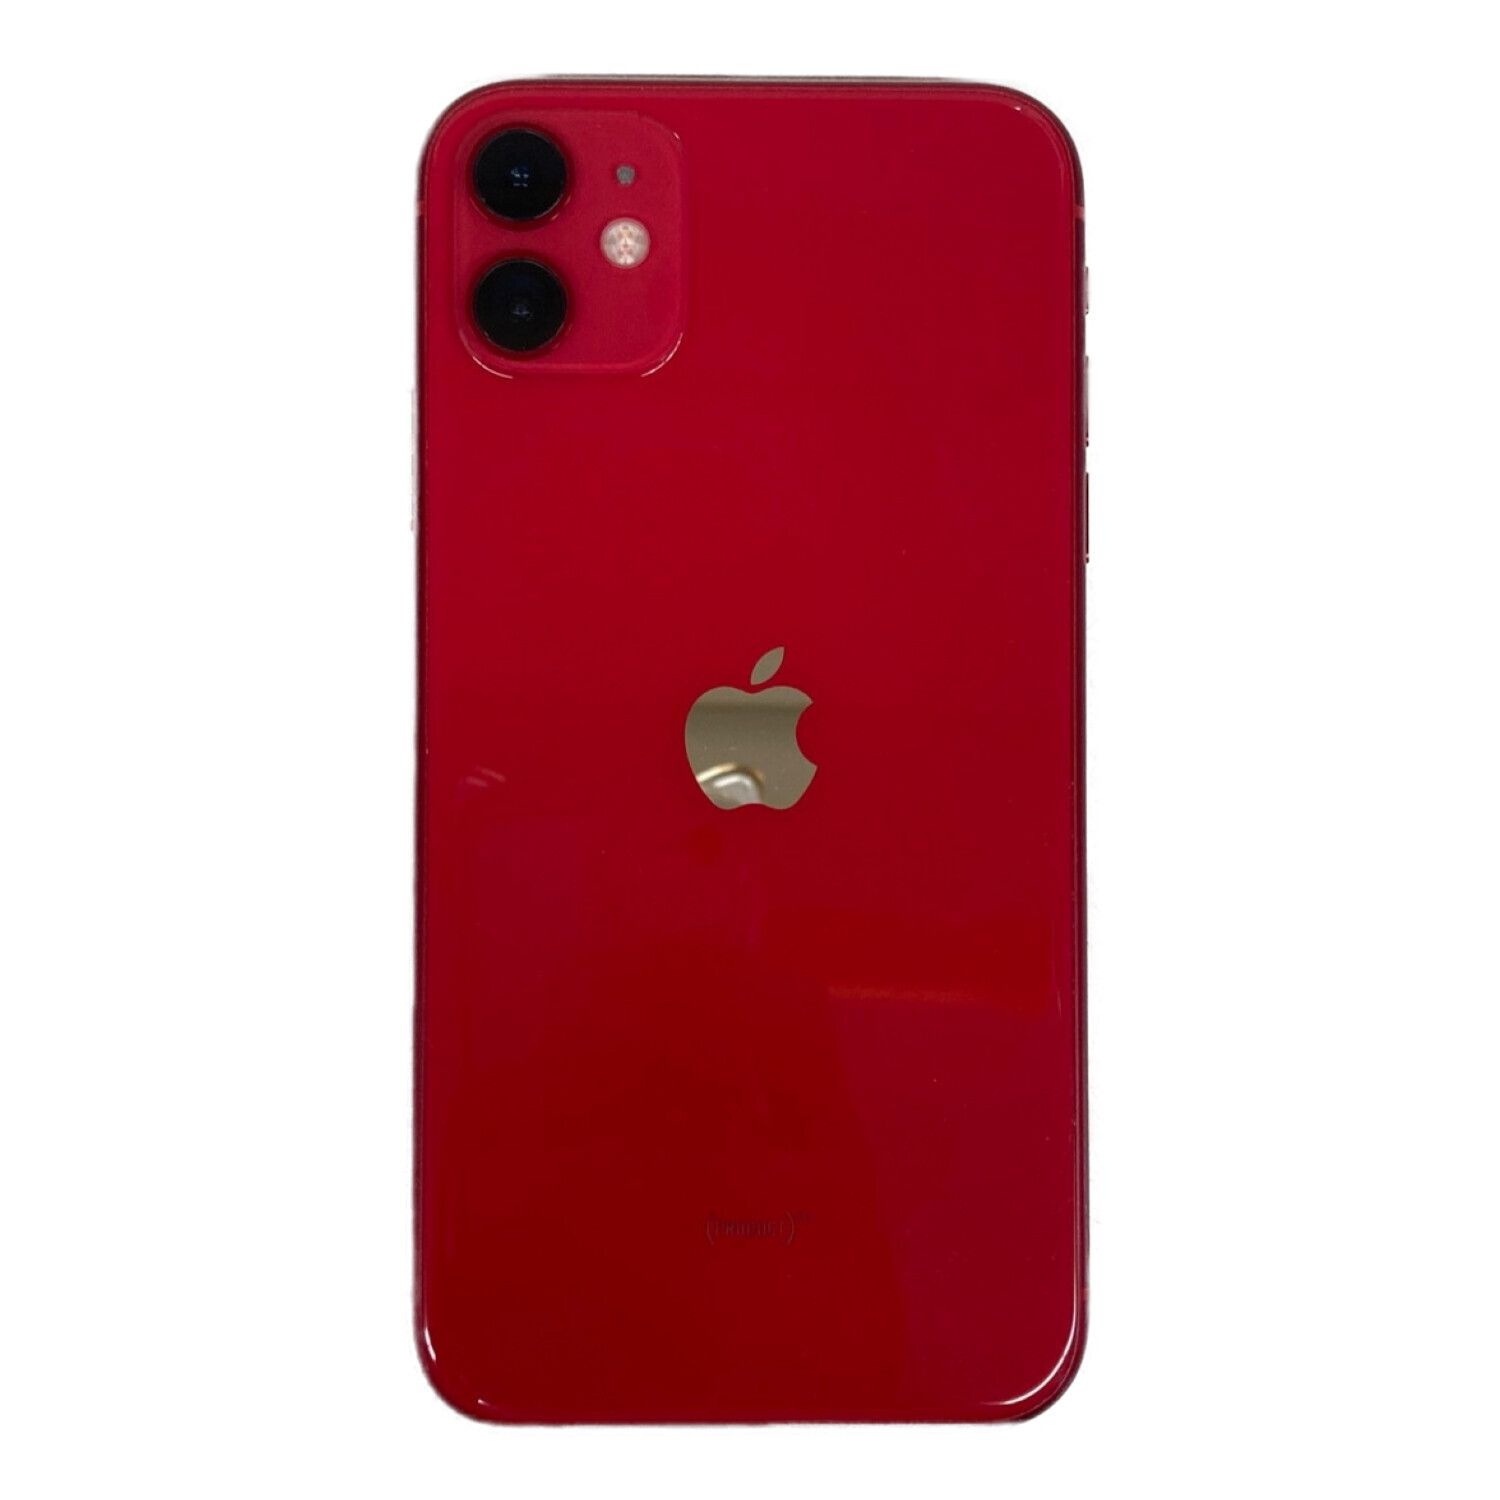 iPhone 11 (PRODUCT)RED 64 GB SIMロック解除済み